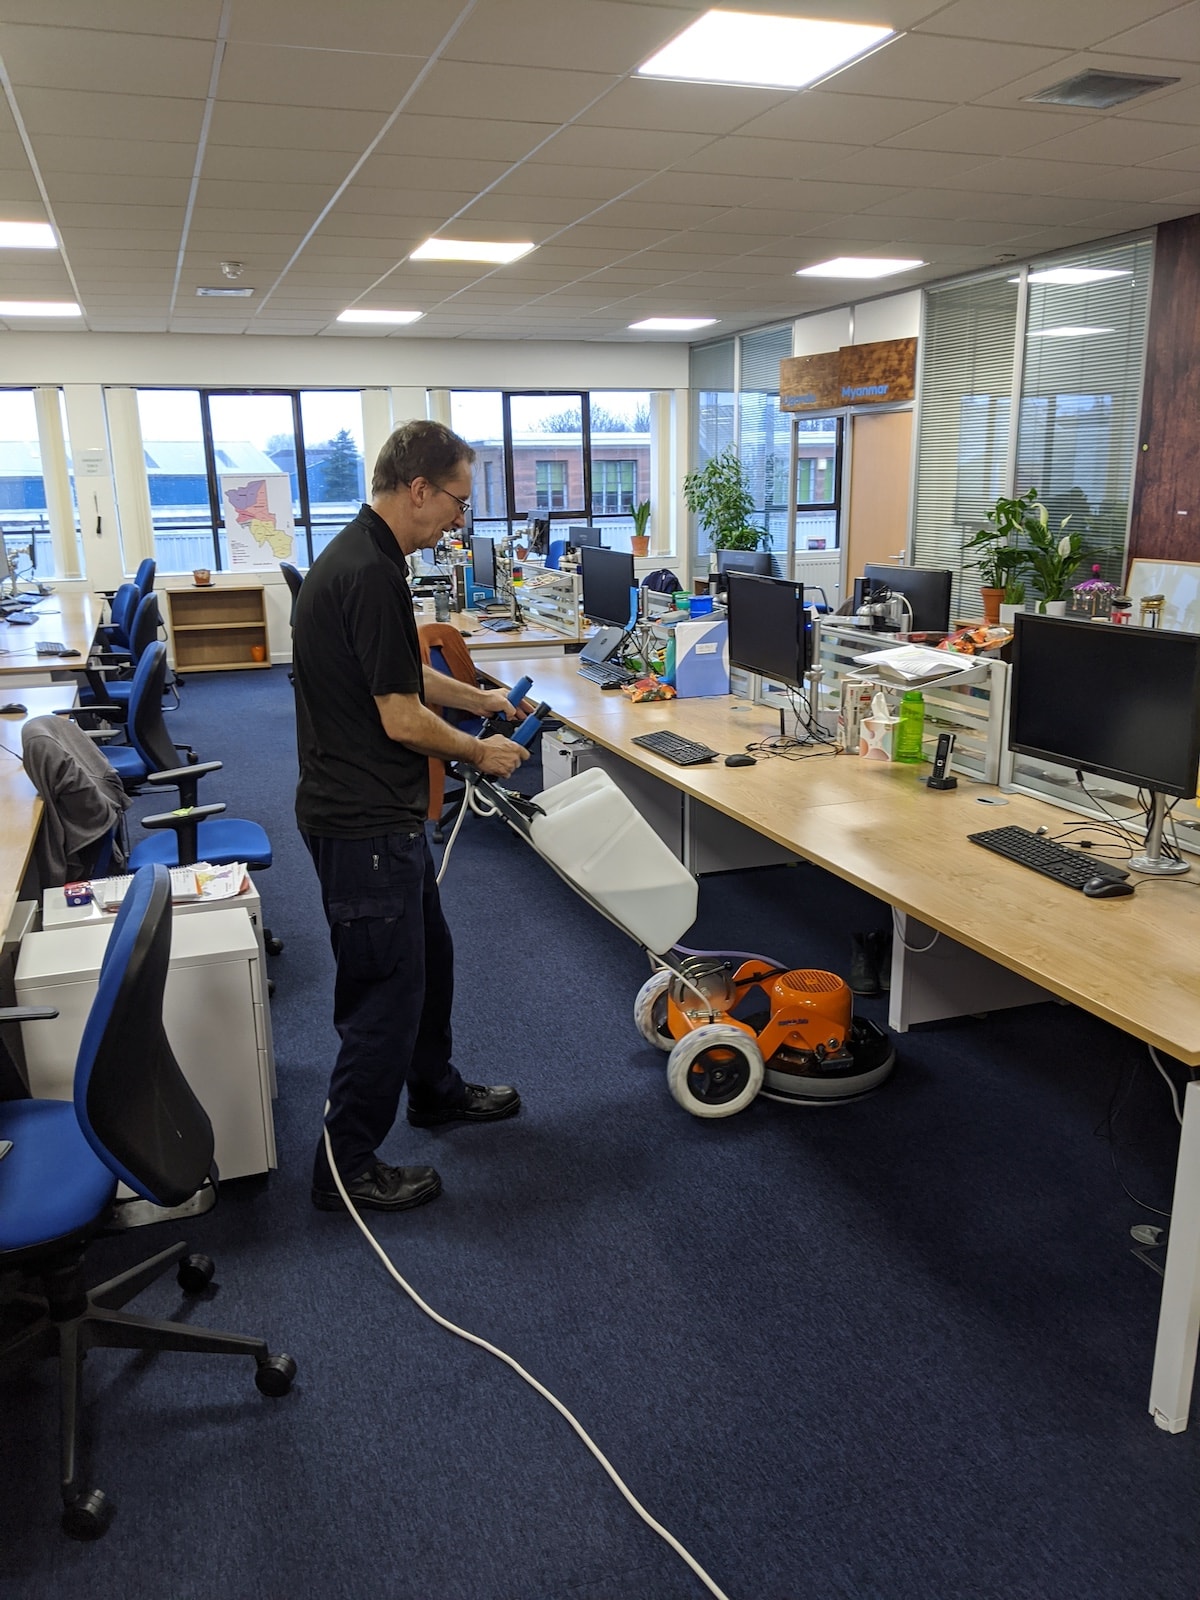 Office Carpet cleaning by professional team member